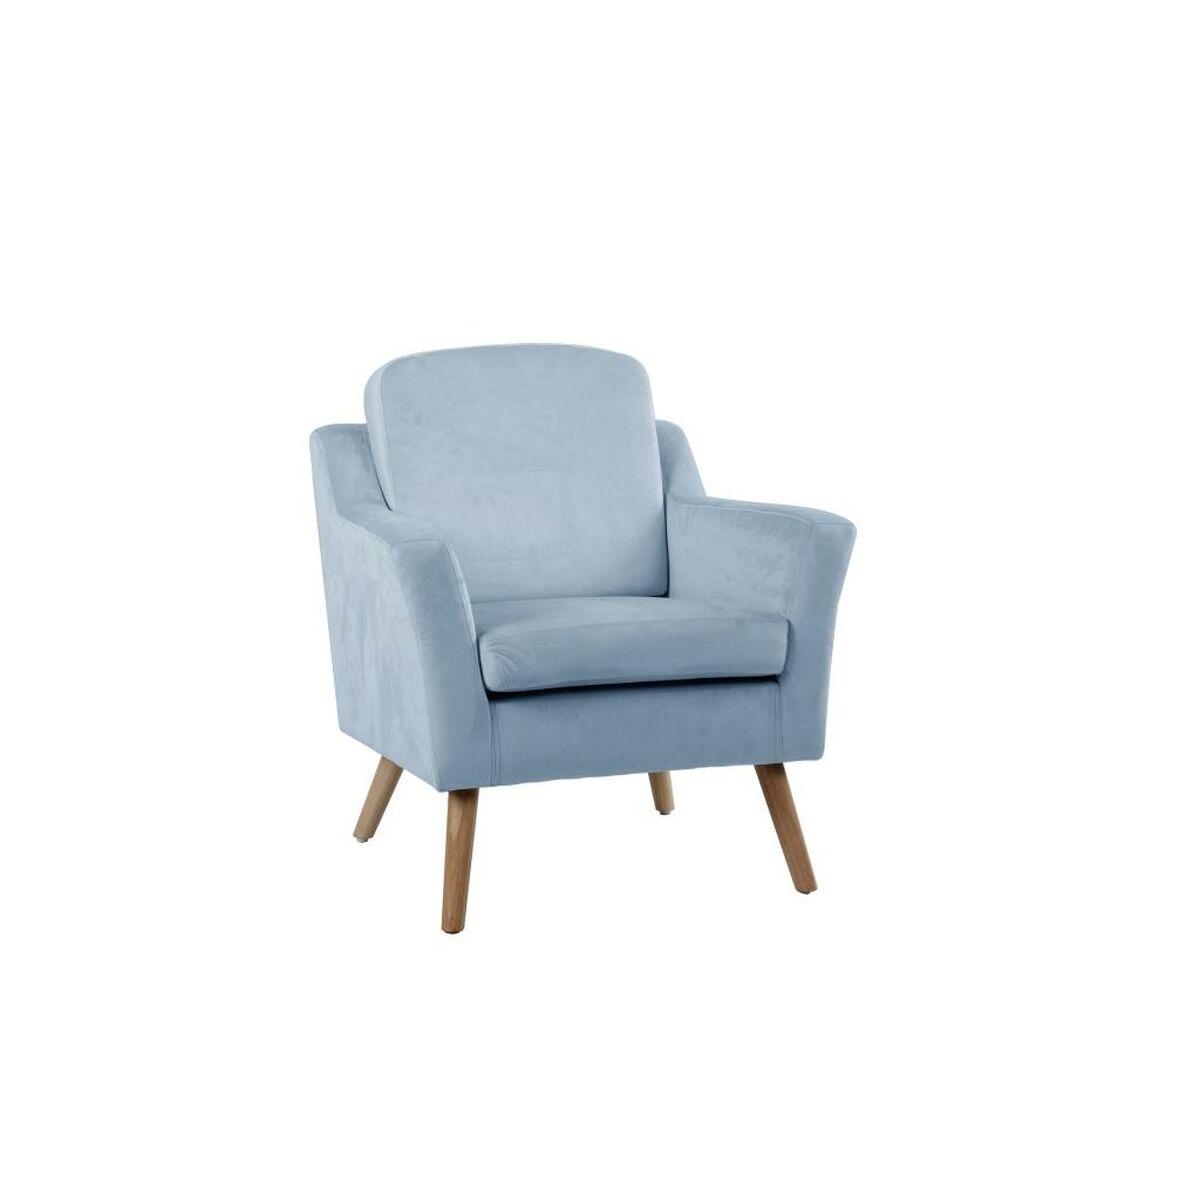 Armchair DKD Home Decor Natural Wood Polyester Sky blue (74 x 76 x 85 cm)